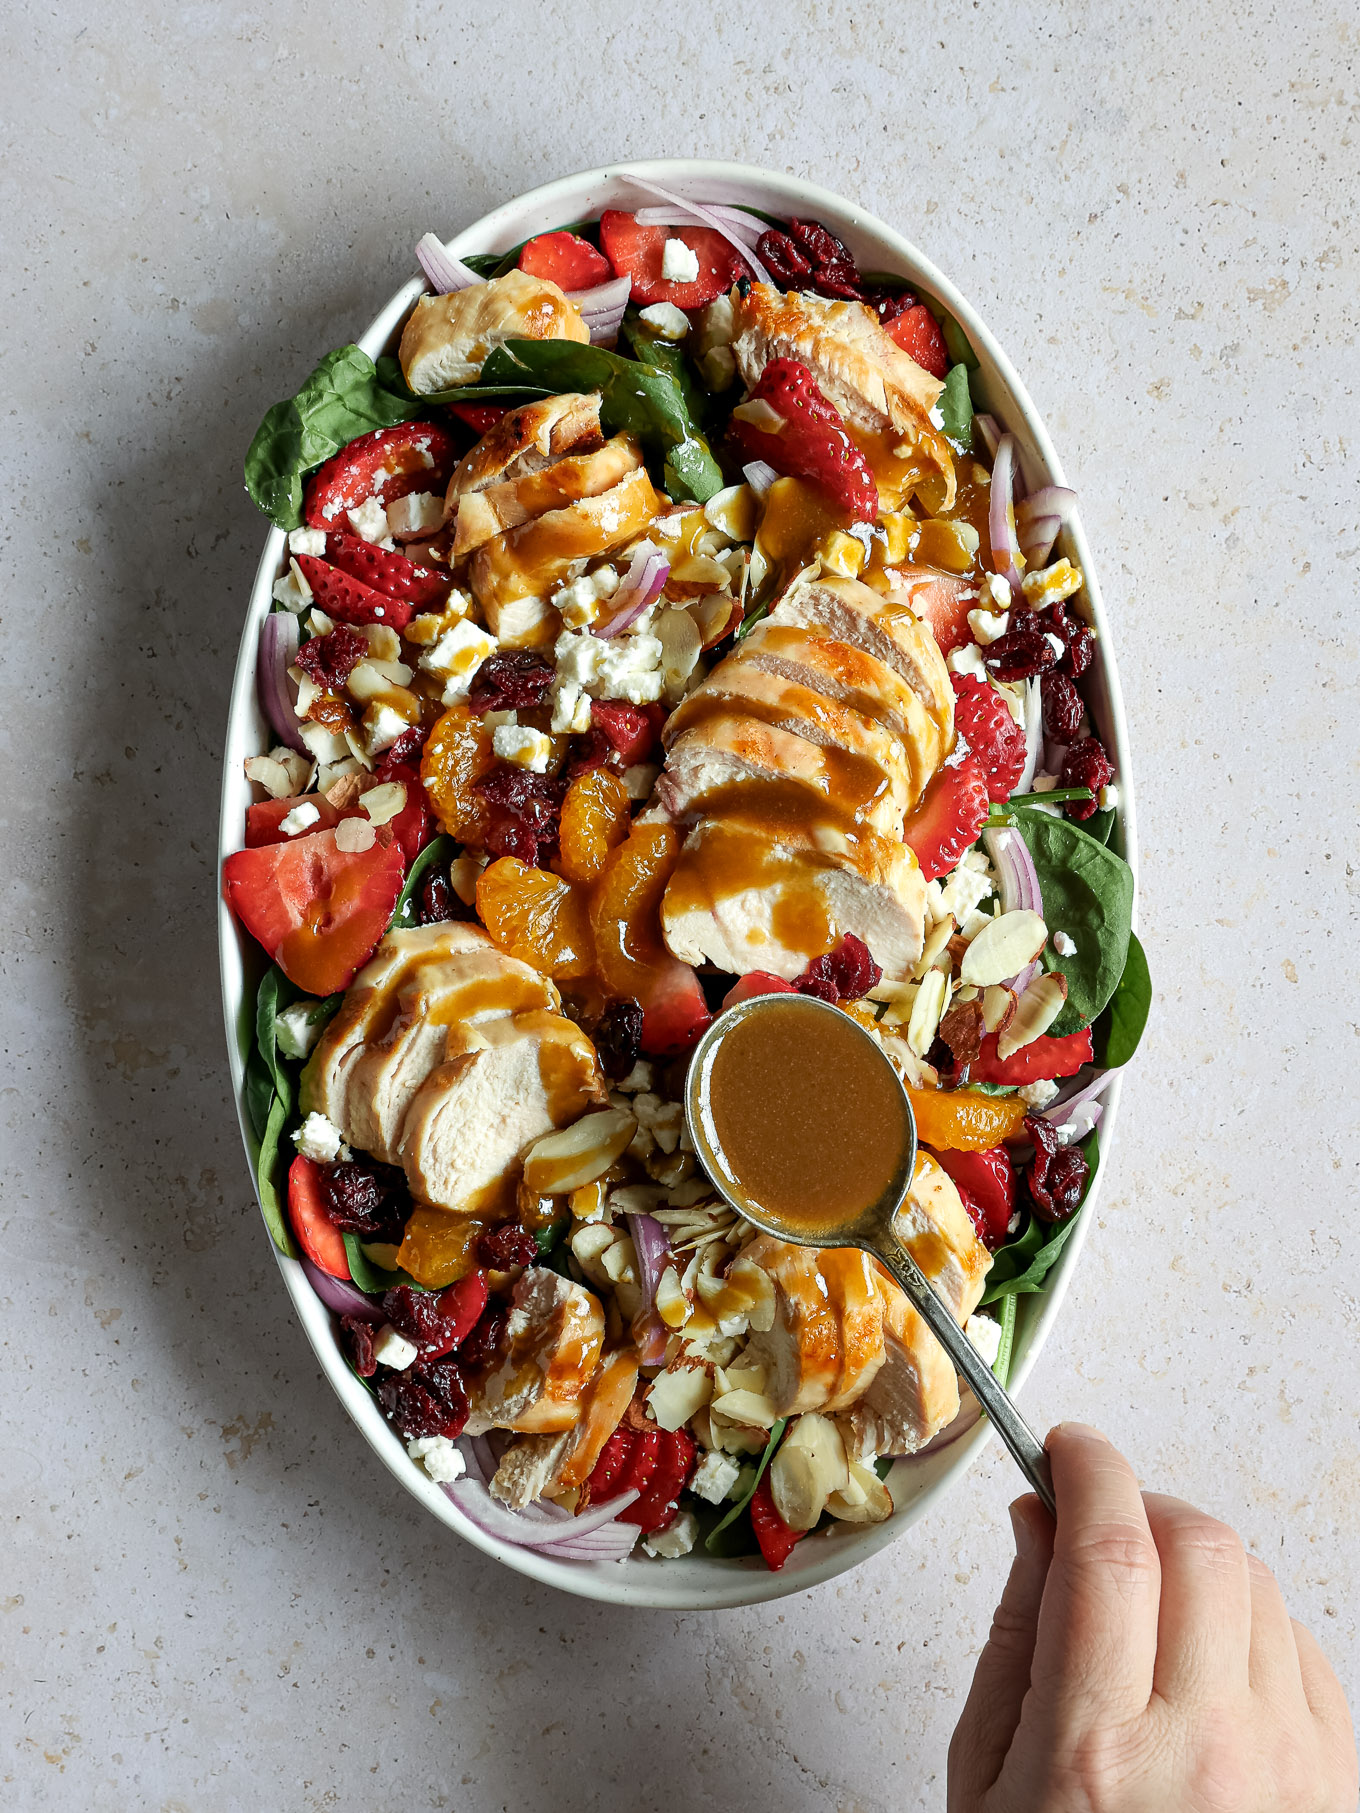 balsamic dressing drizzled over spinach salad.